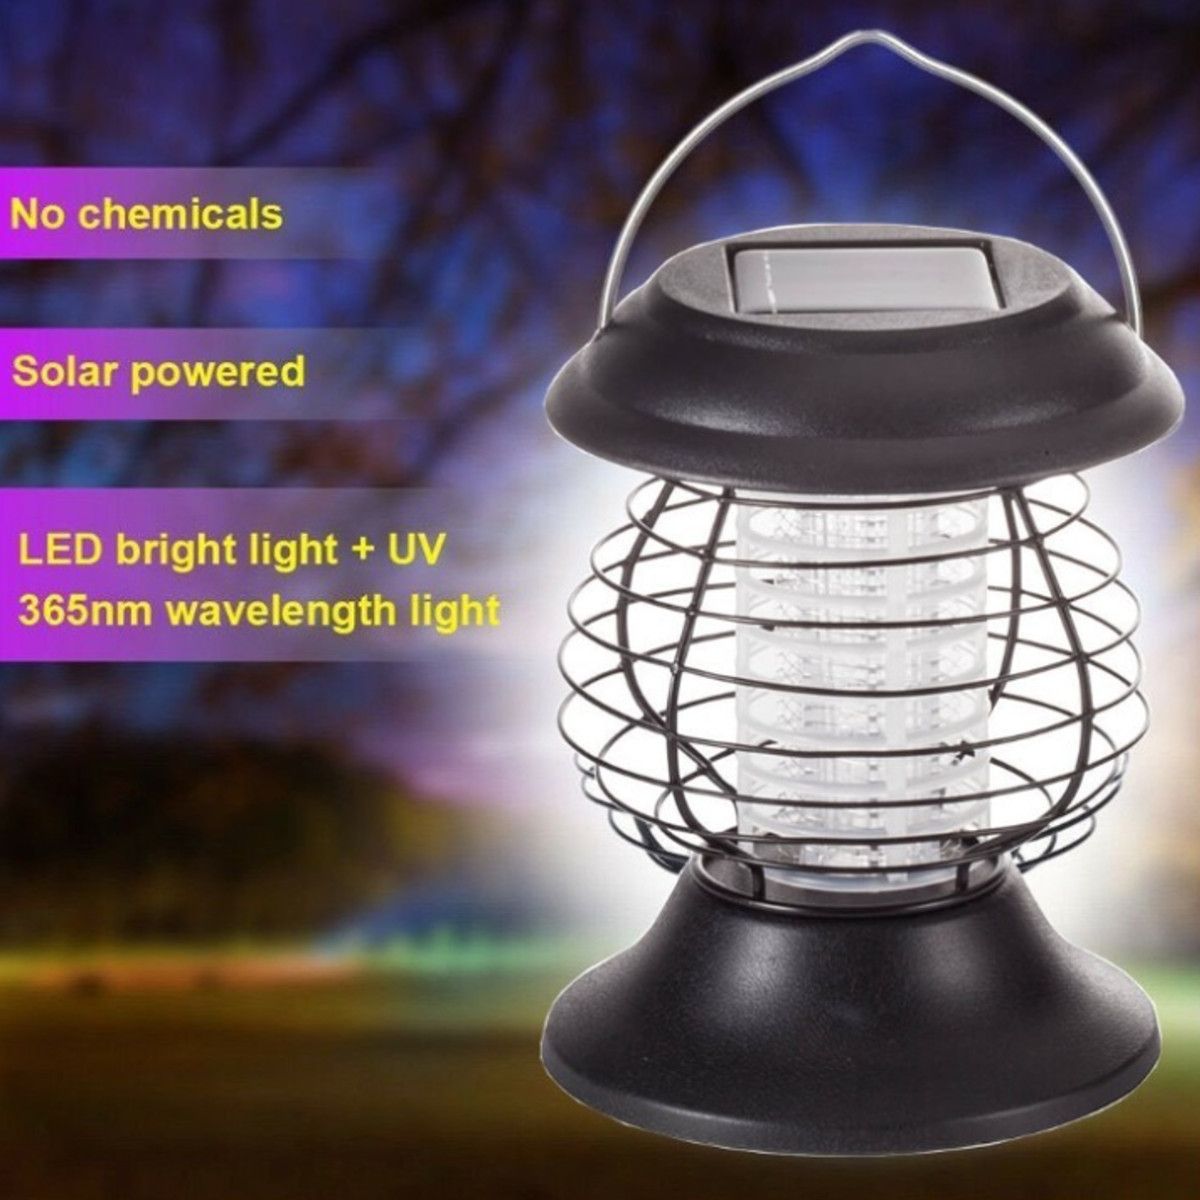 Electric-Fly-Zapper-Mosquito-Insect-Killer-UV-LED-Purple-Tube-Light-Trap-Pest-Solar-IP65-Working-8-H-1693978